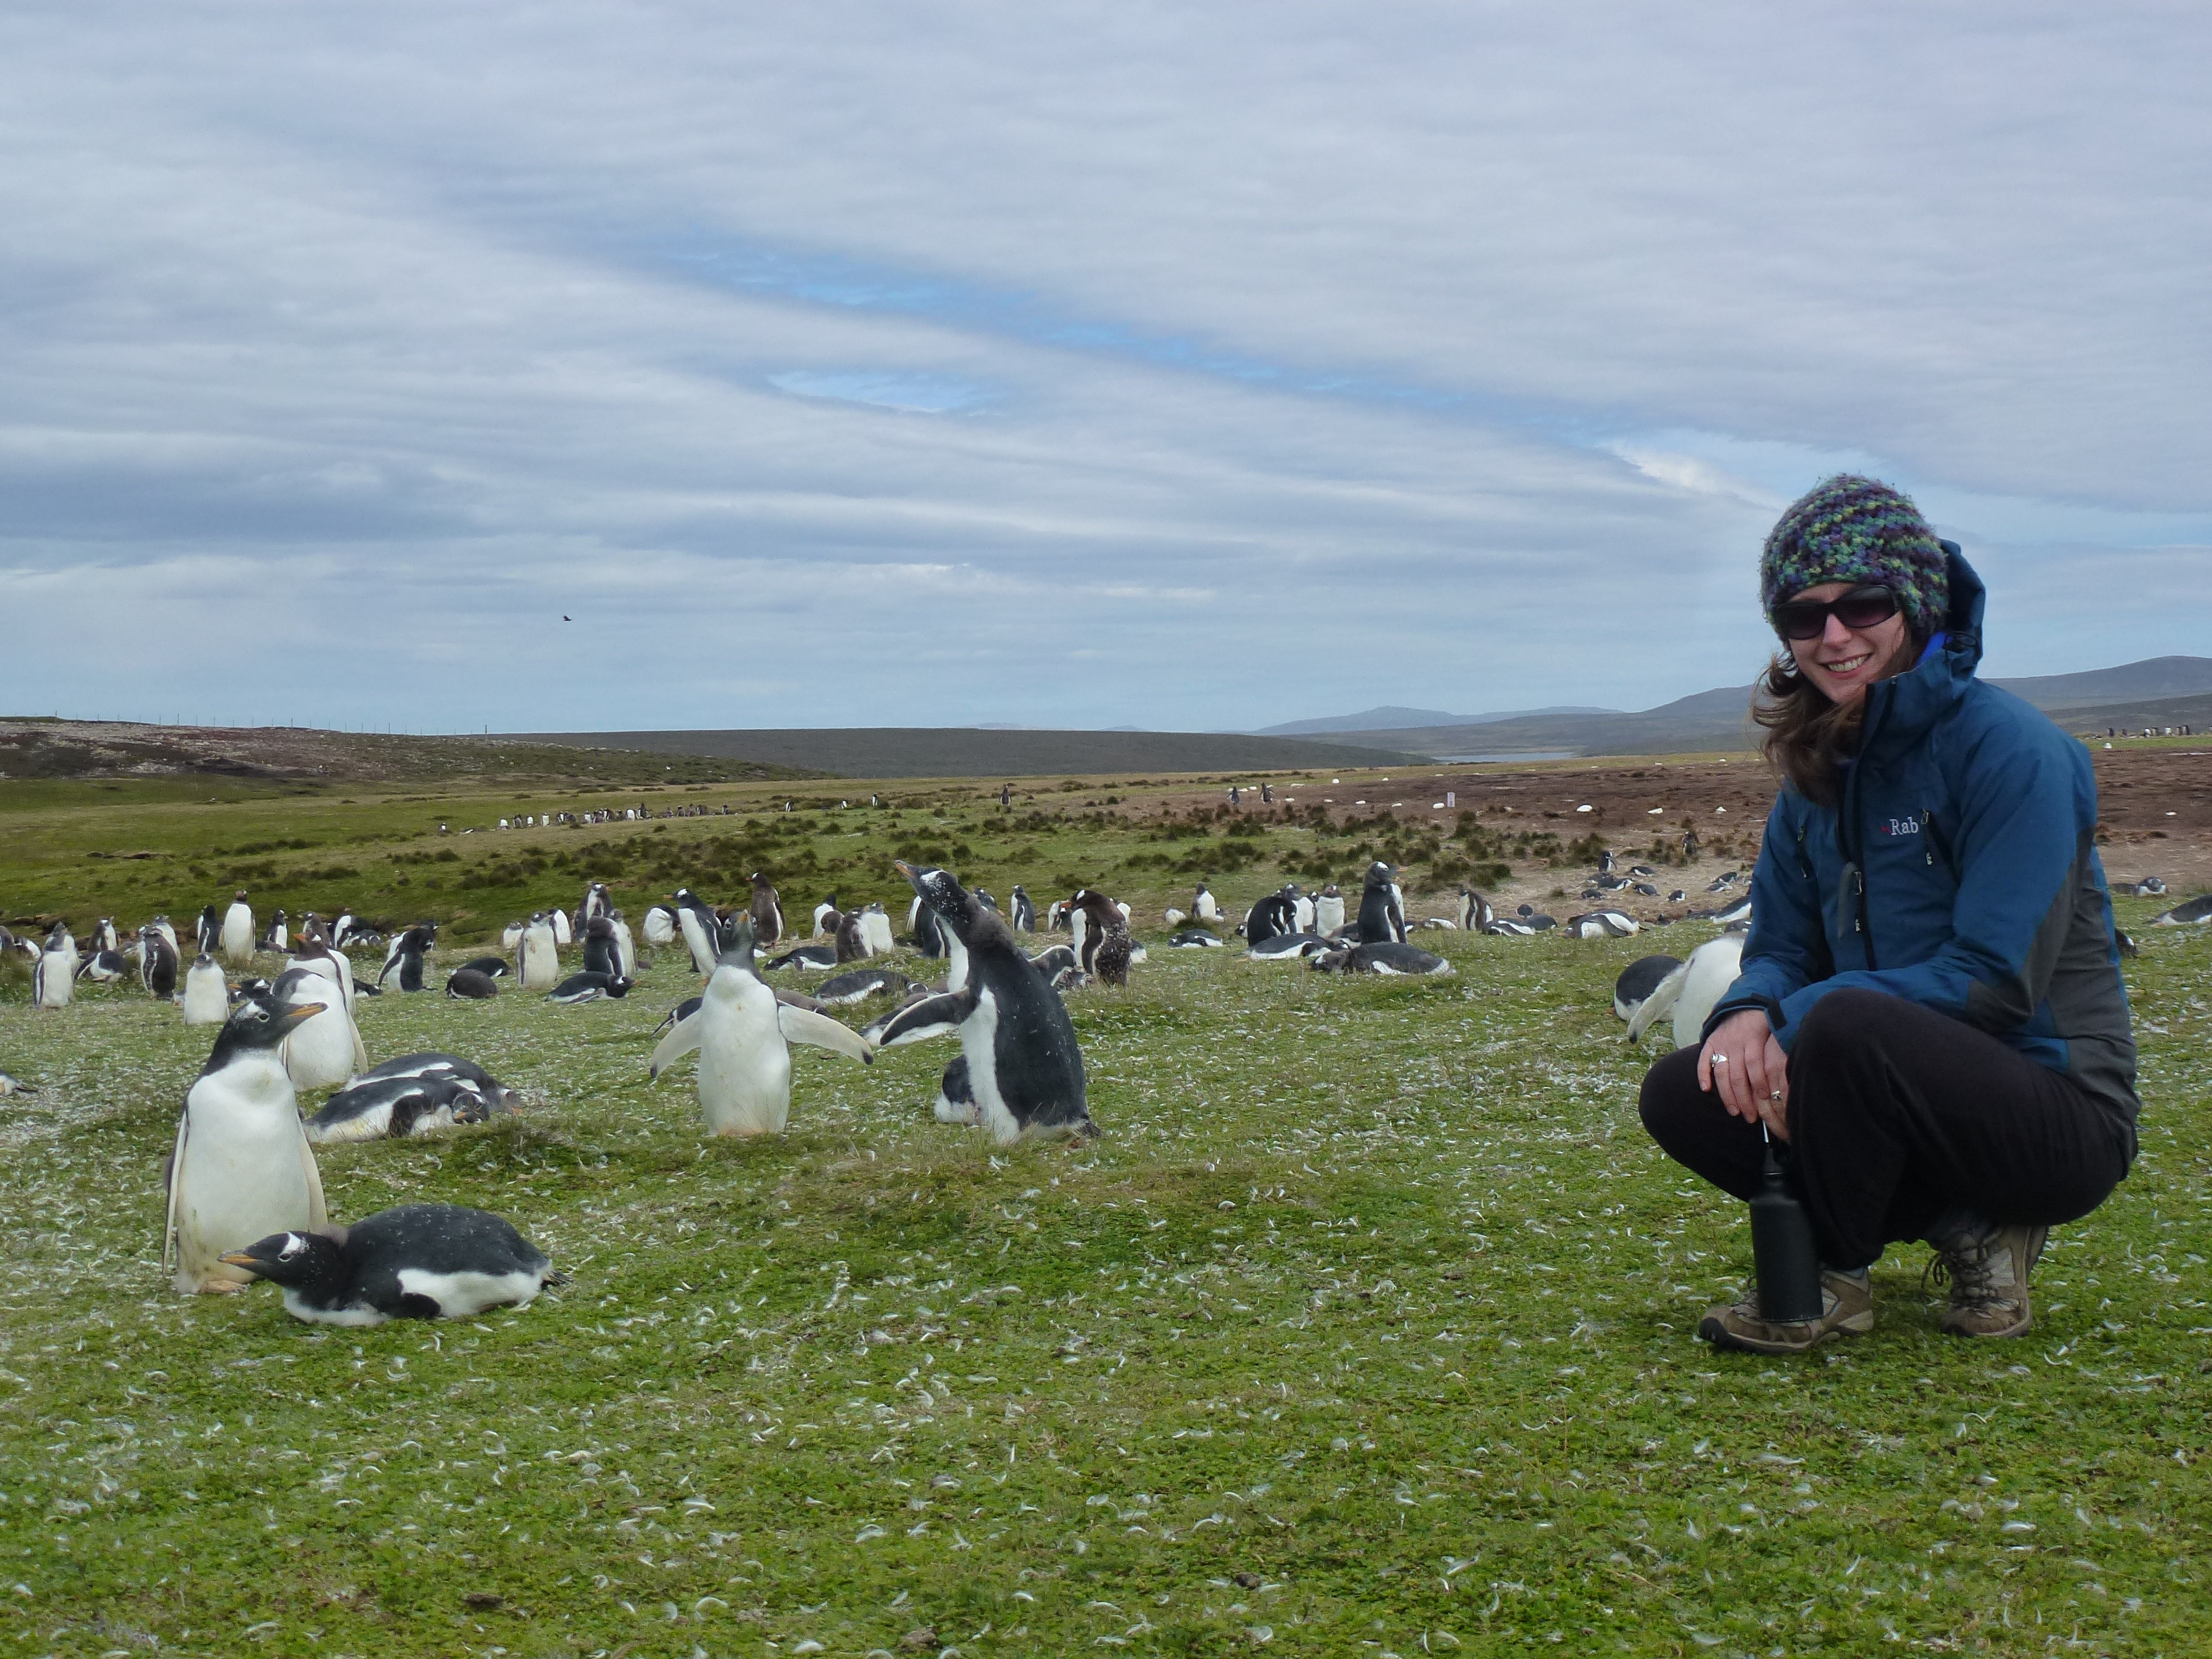 Above: Dr Frances Hopkins in the Falklands pictured alongside a large group of Gentoo penguins. Like other penguin species, gentoo penguins rely on the ocean for food and are never far from the water.   